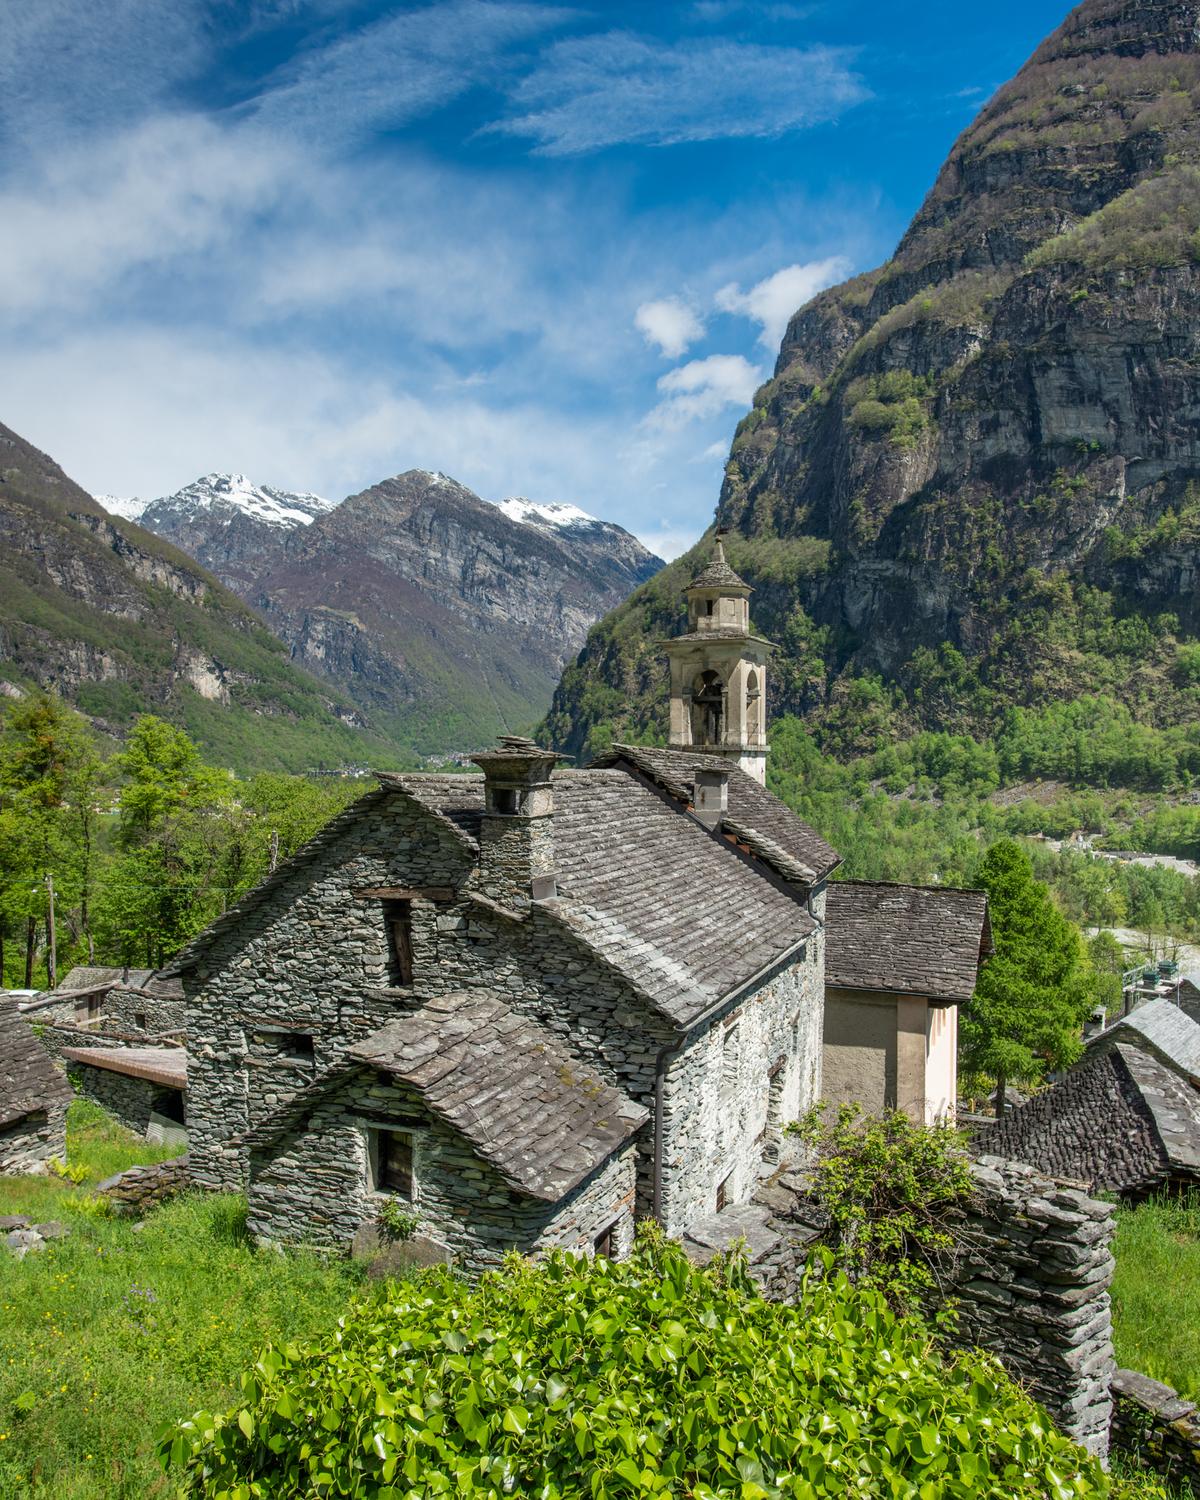 A stone church with a view of the valley. (Courtesy of <a href="https://www.facebook.com/michelphotographyCH/">Sylvia Michel Photography</a>)